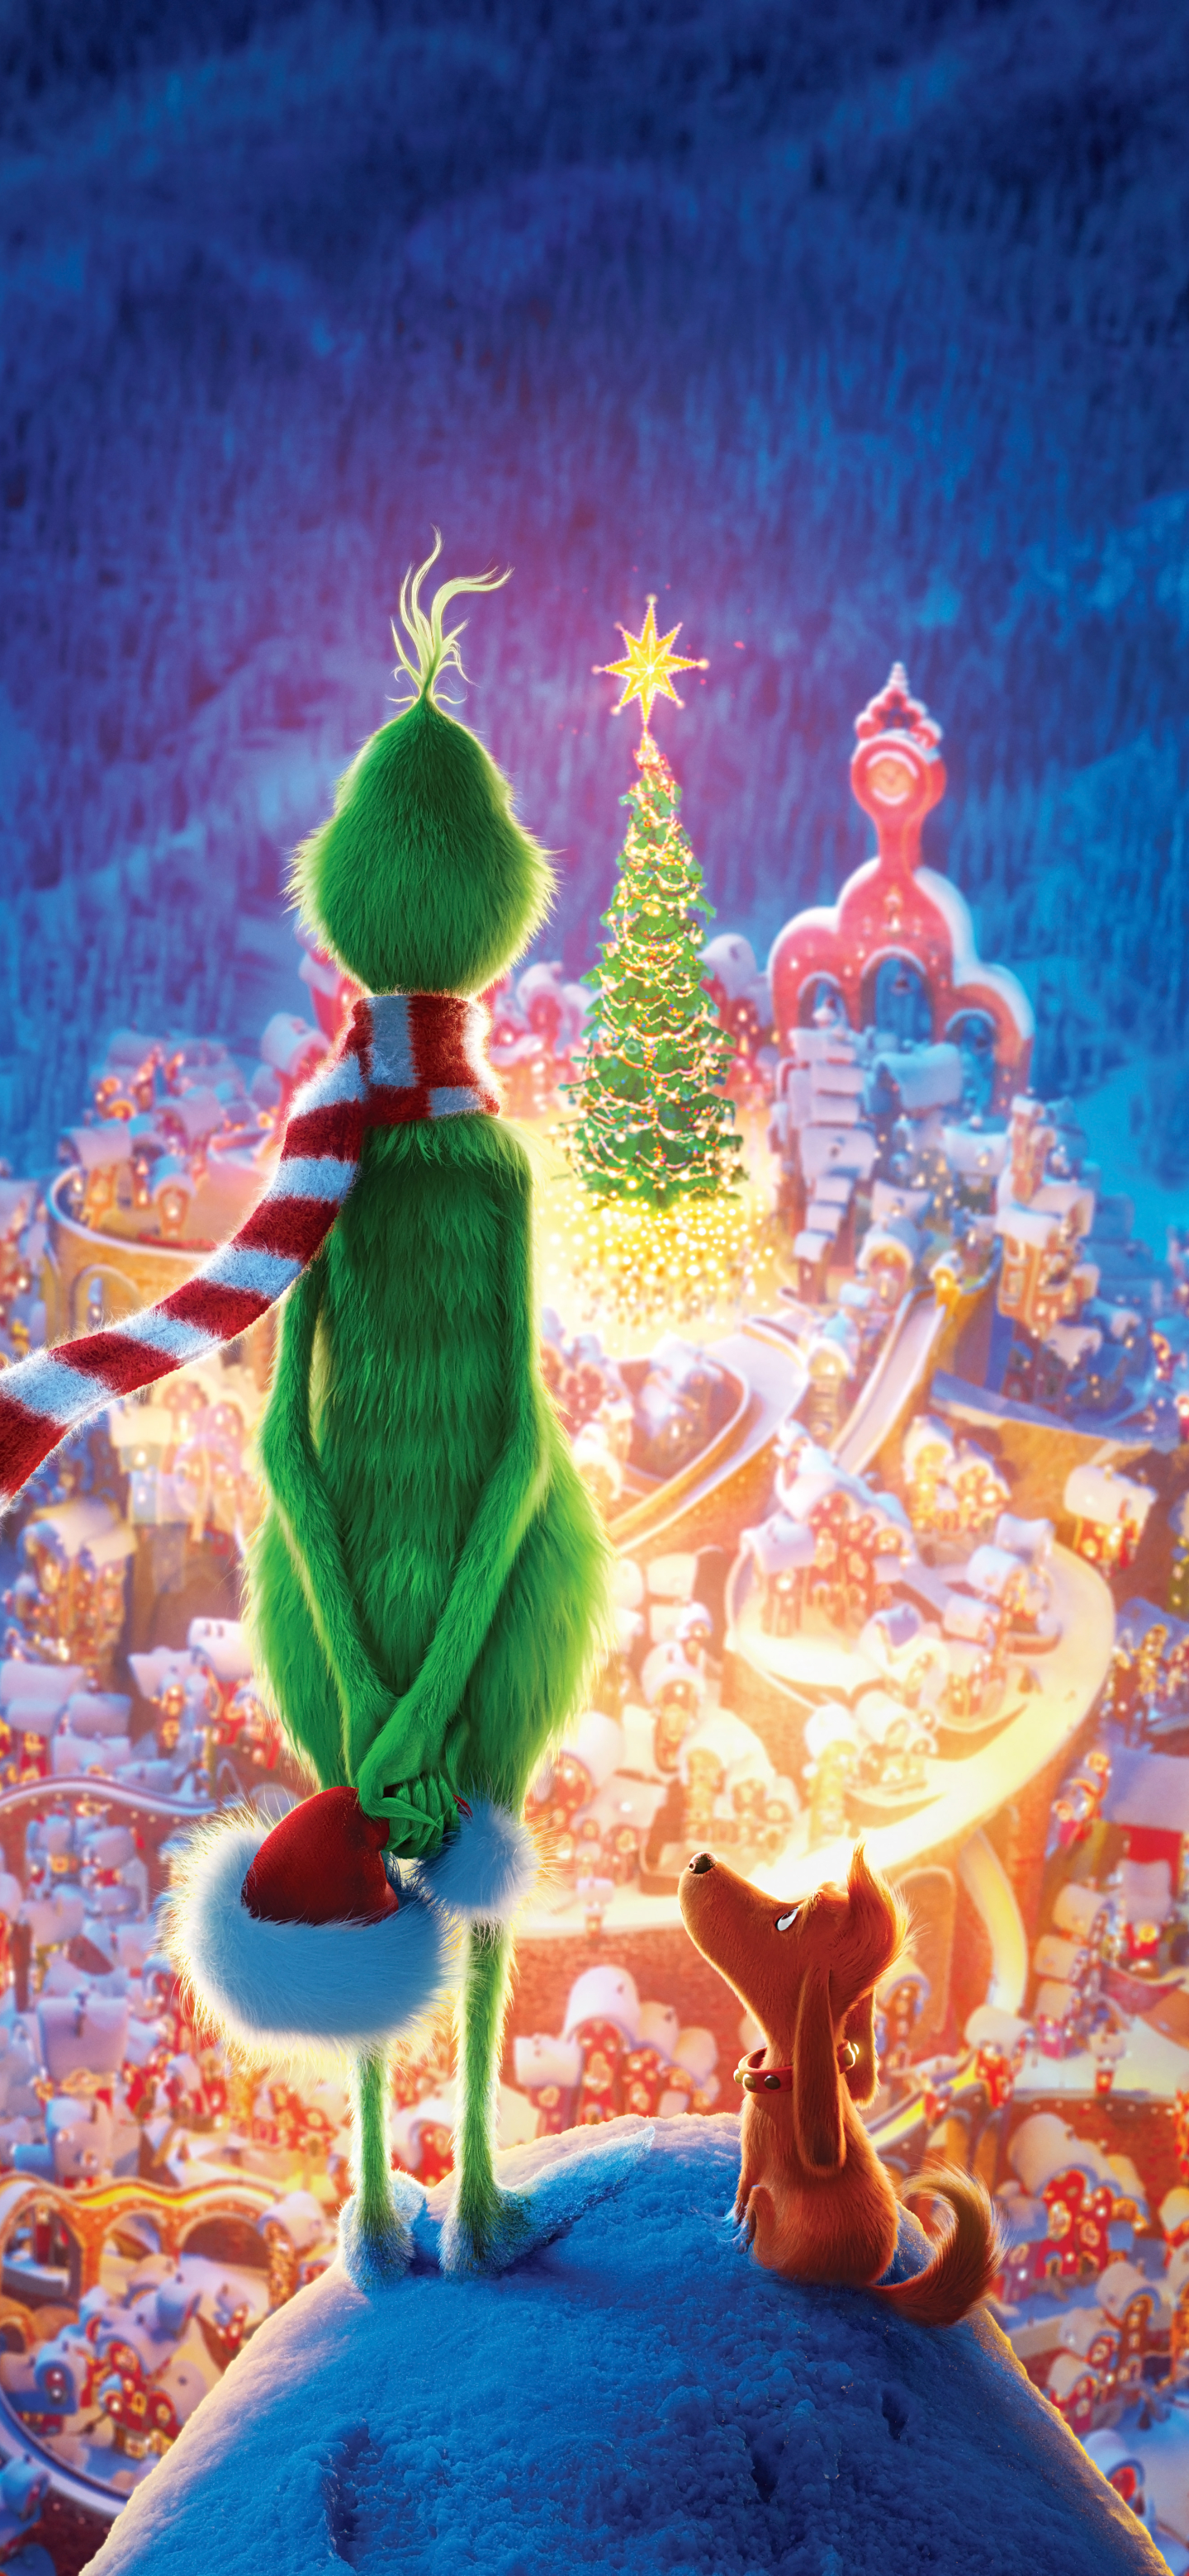 the grinch  Other  Animals Background Wallpapers on Desktop Nexus Image  552640